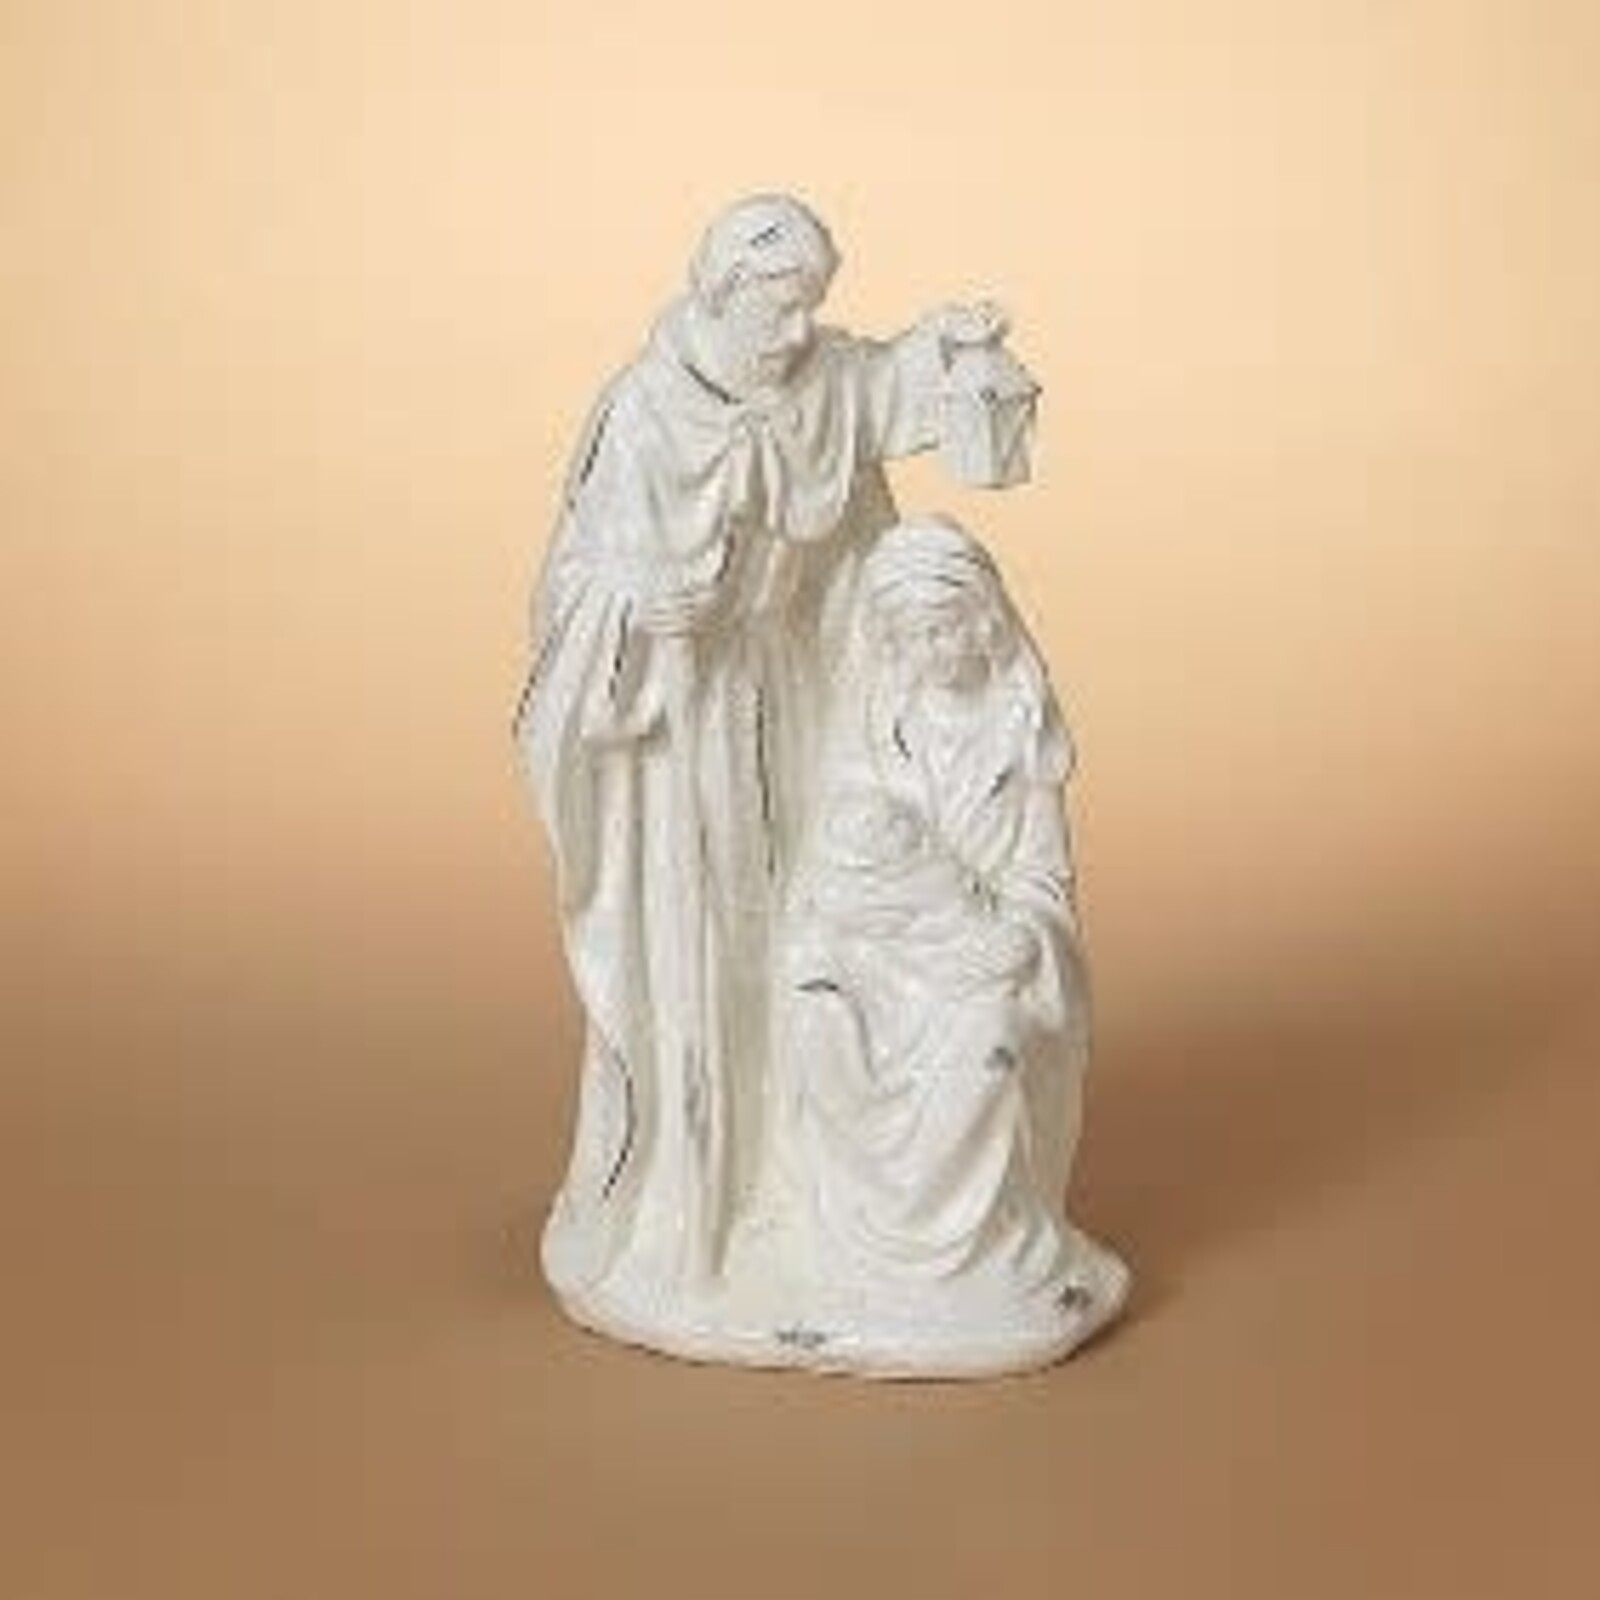 Gerson 13.5" Resin Holy Family Figurine  2533420 loading=